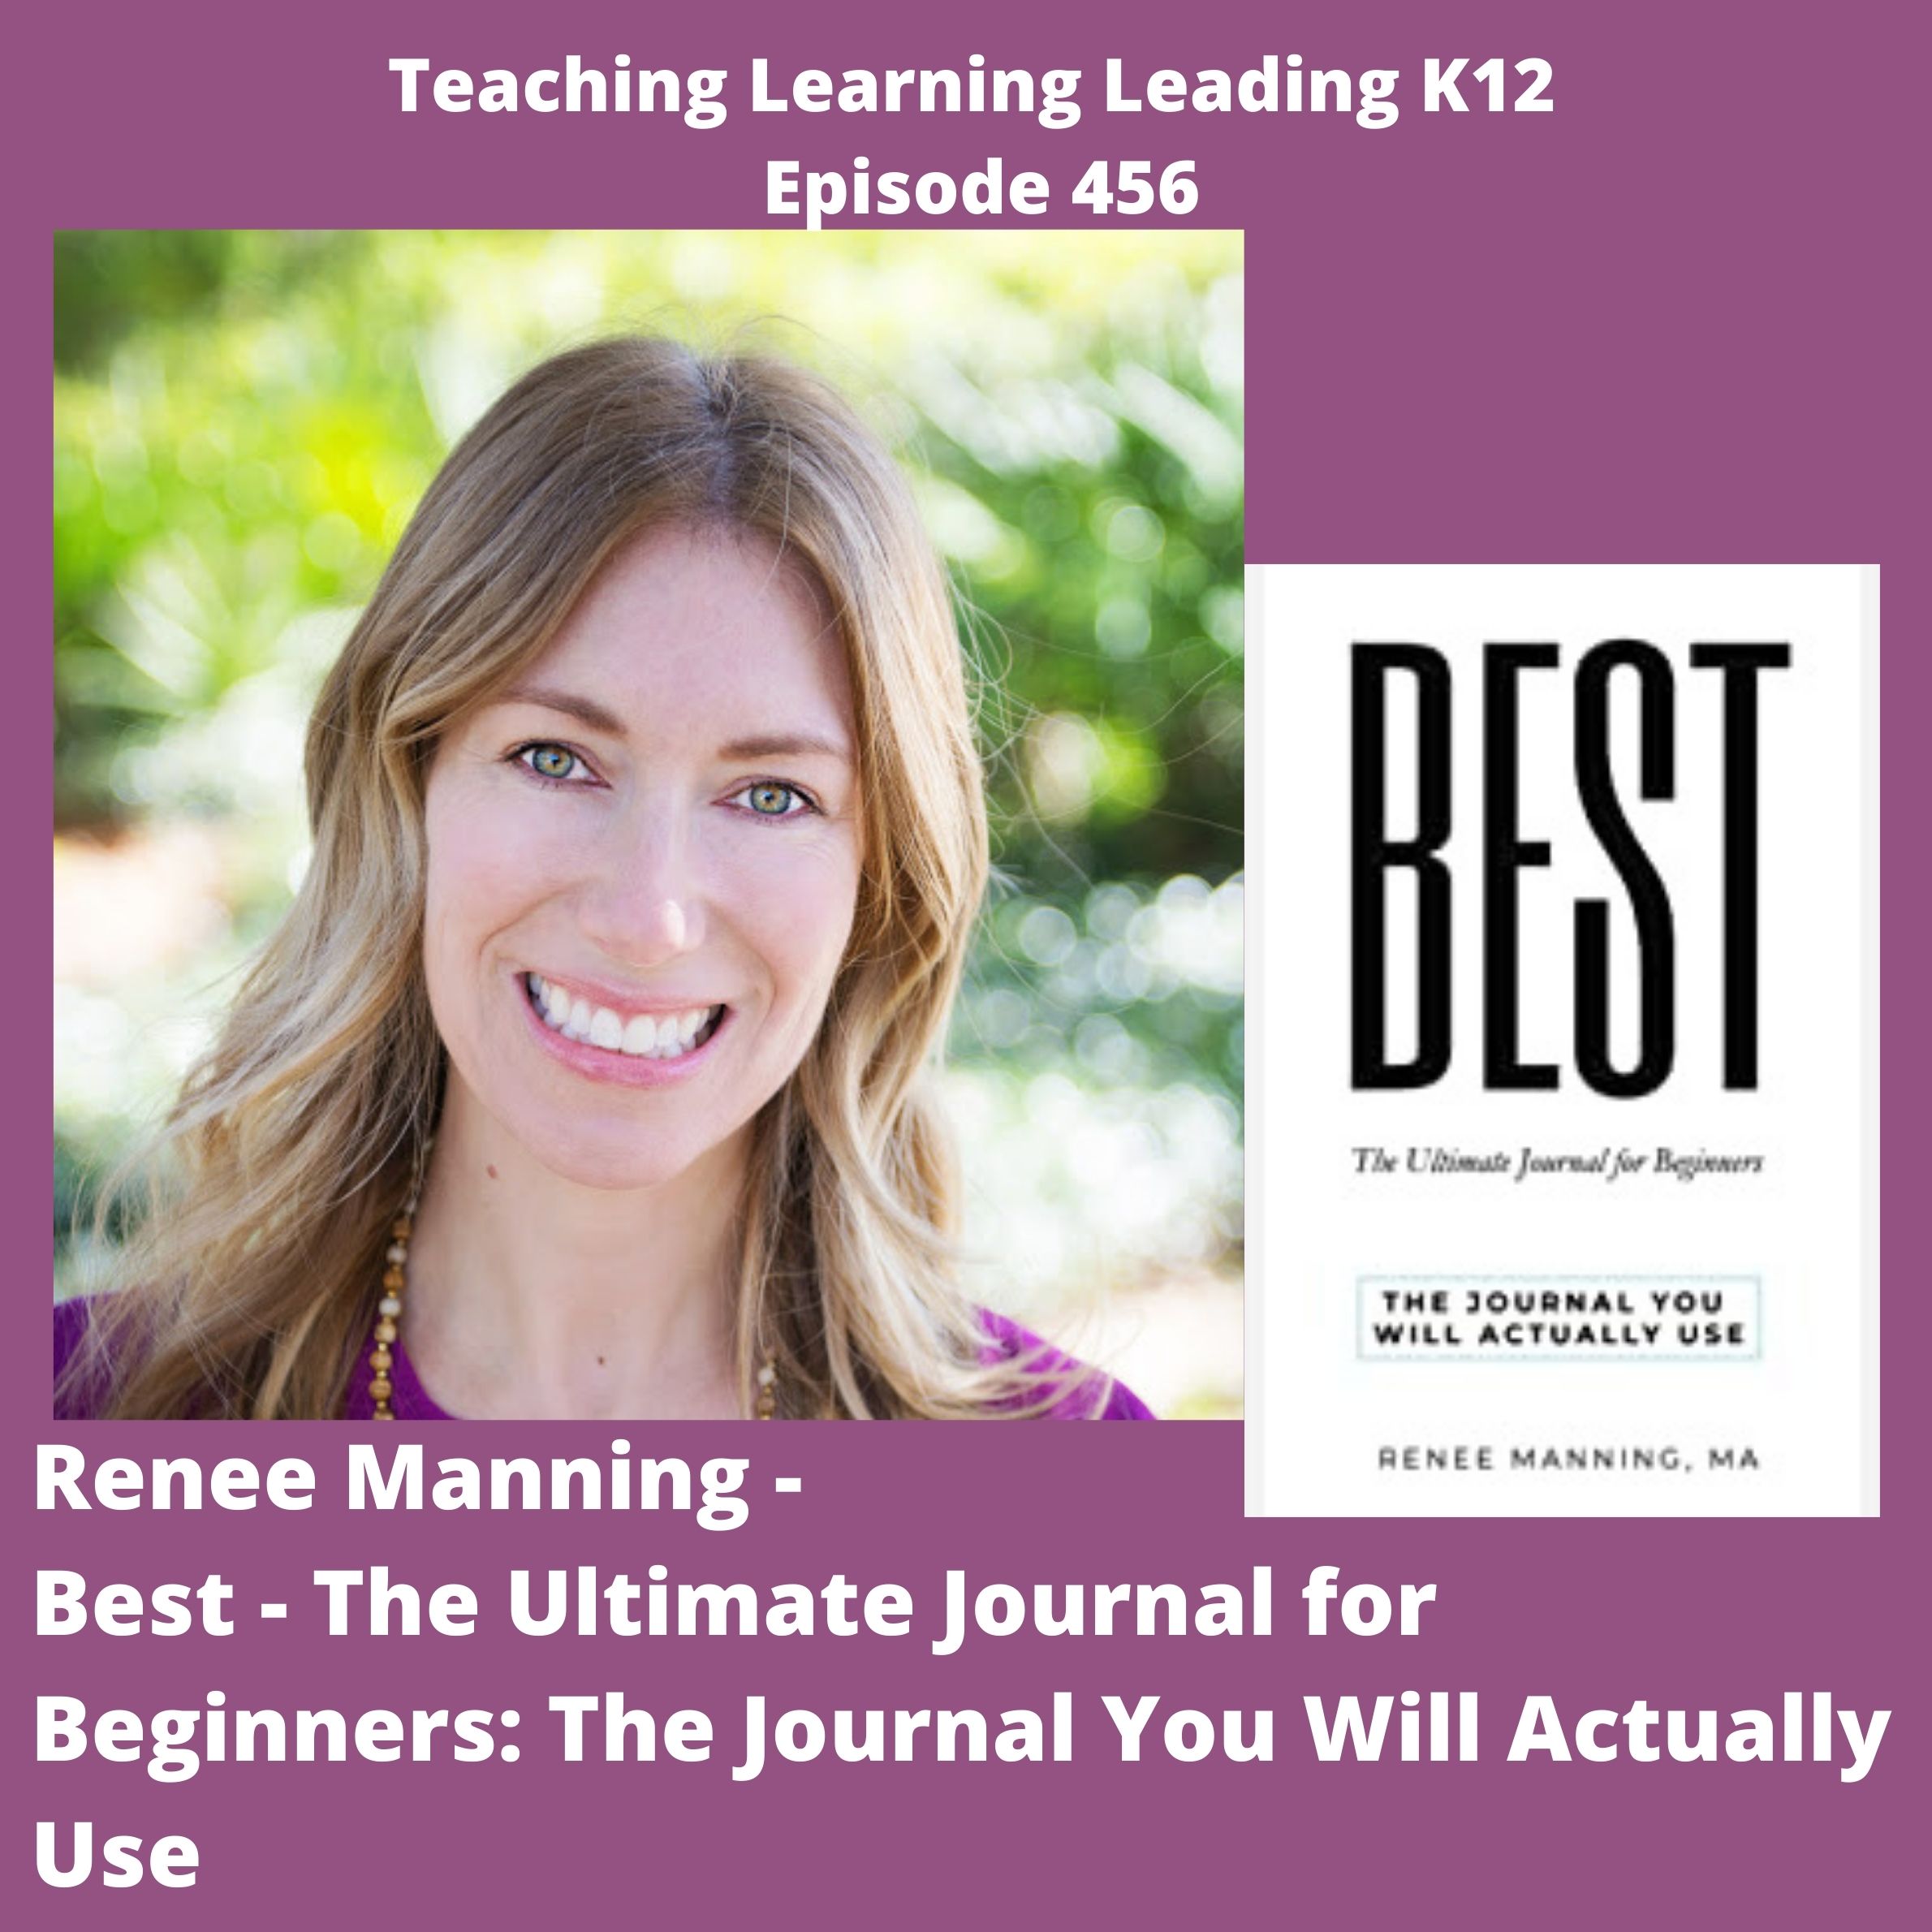 Episode image for Renee Manning - Best - The Ultimate Journal for Beginners: The Journal You Will Actually Use - 456